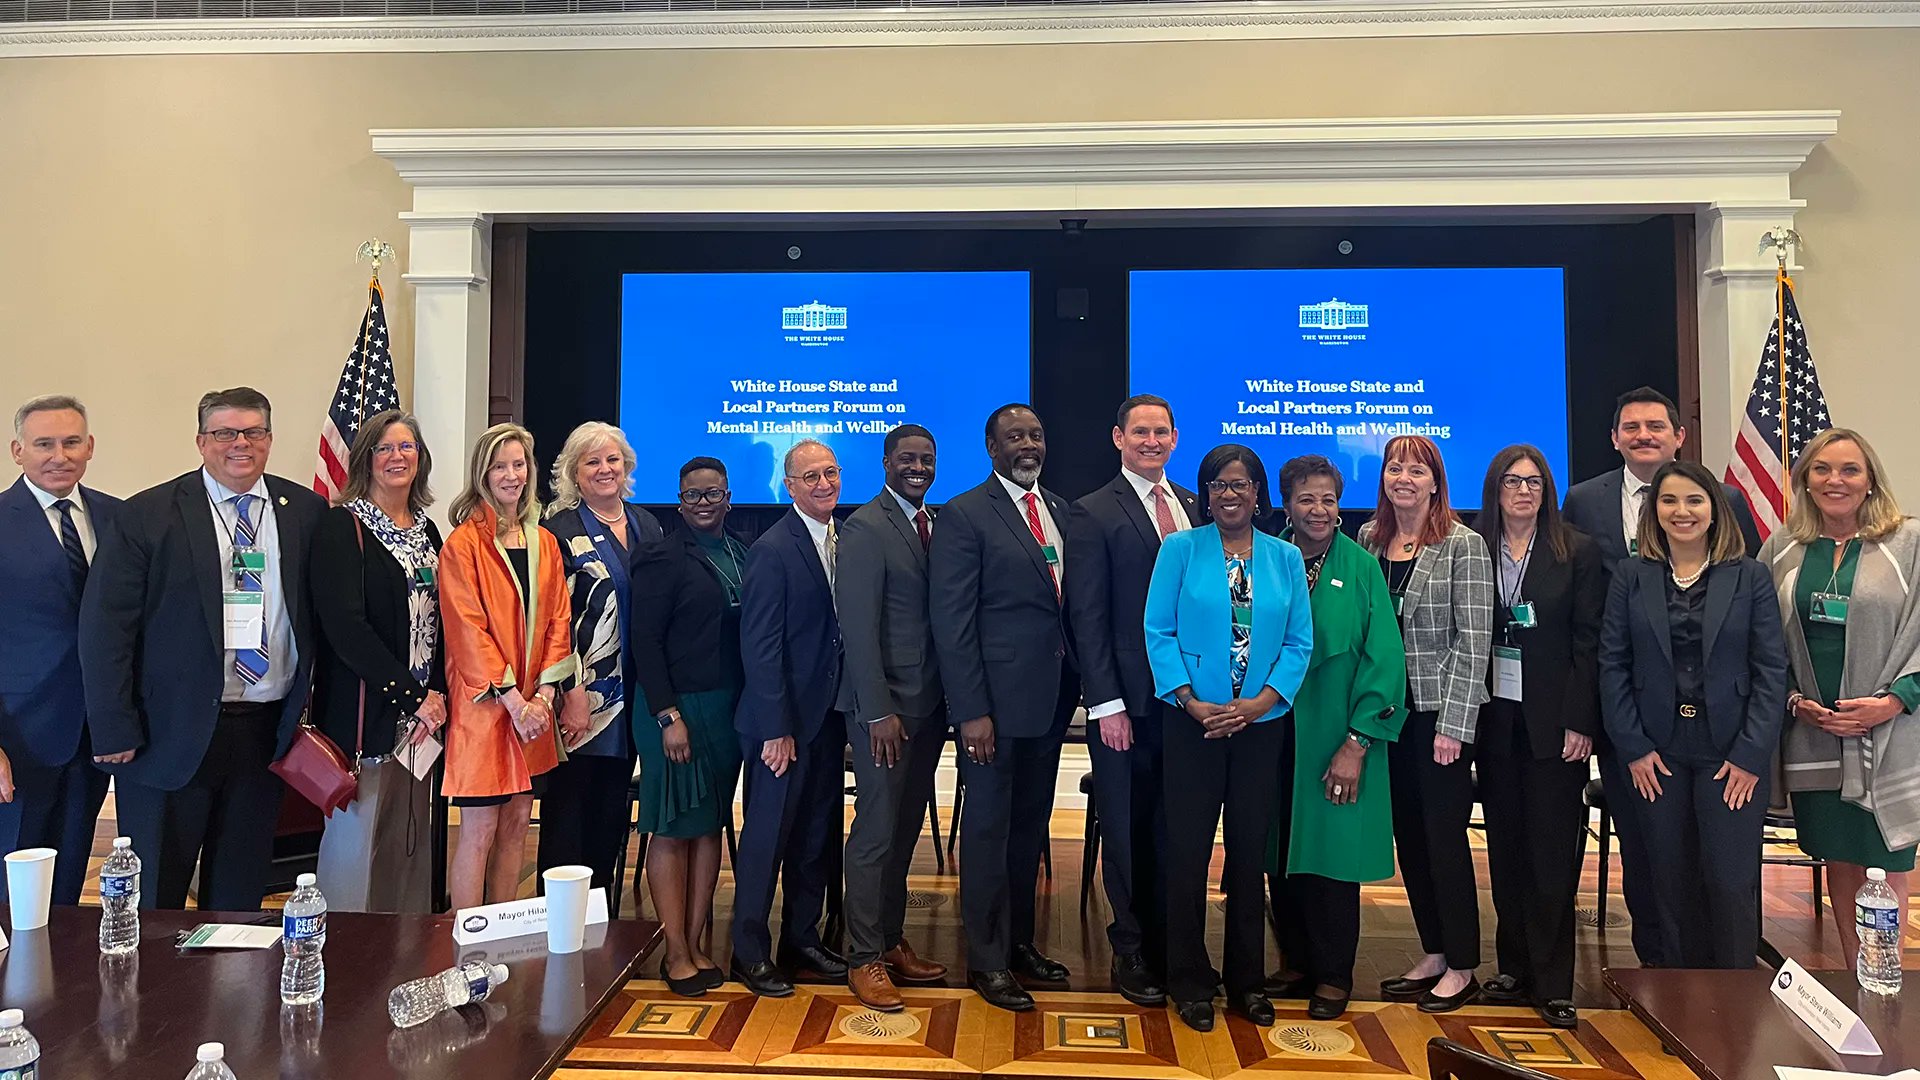 Local leaders, including AOC Executive Director Gina Nikkel, Ph.D, attend the White House State and Local Partners Forum on Mental Health and Wellbeing